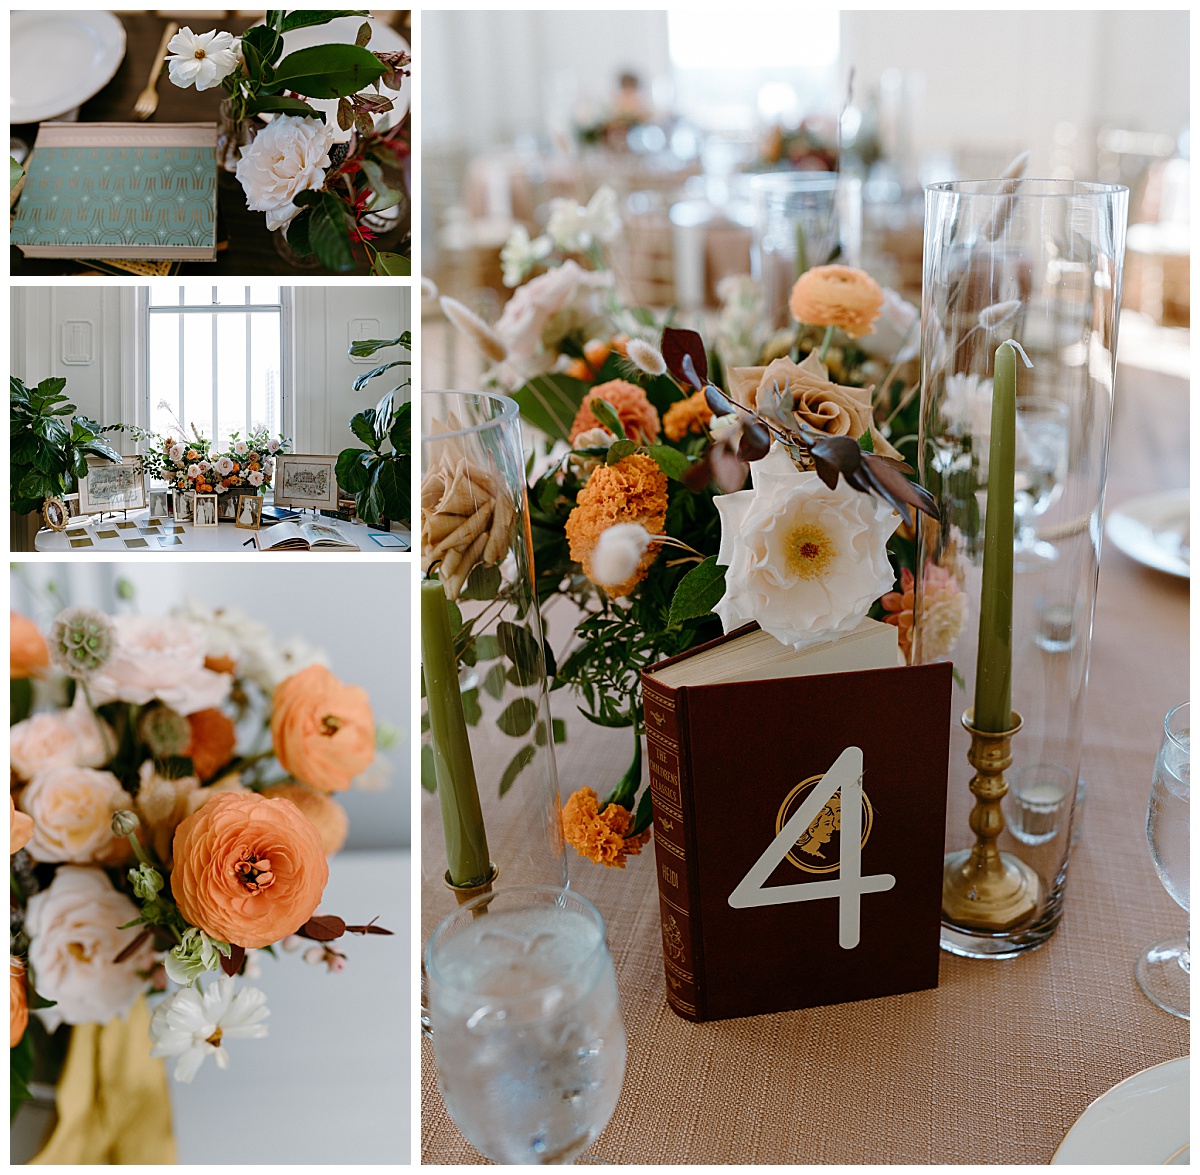 tables adorned with books, candles, and floral centerpieces by The Hazel Club